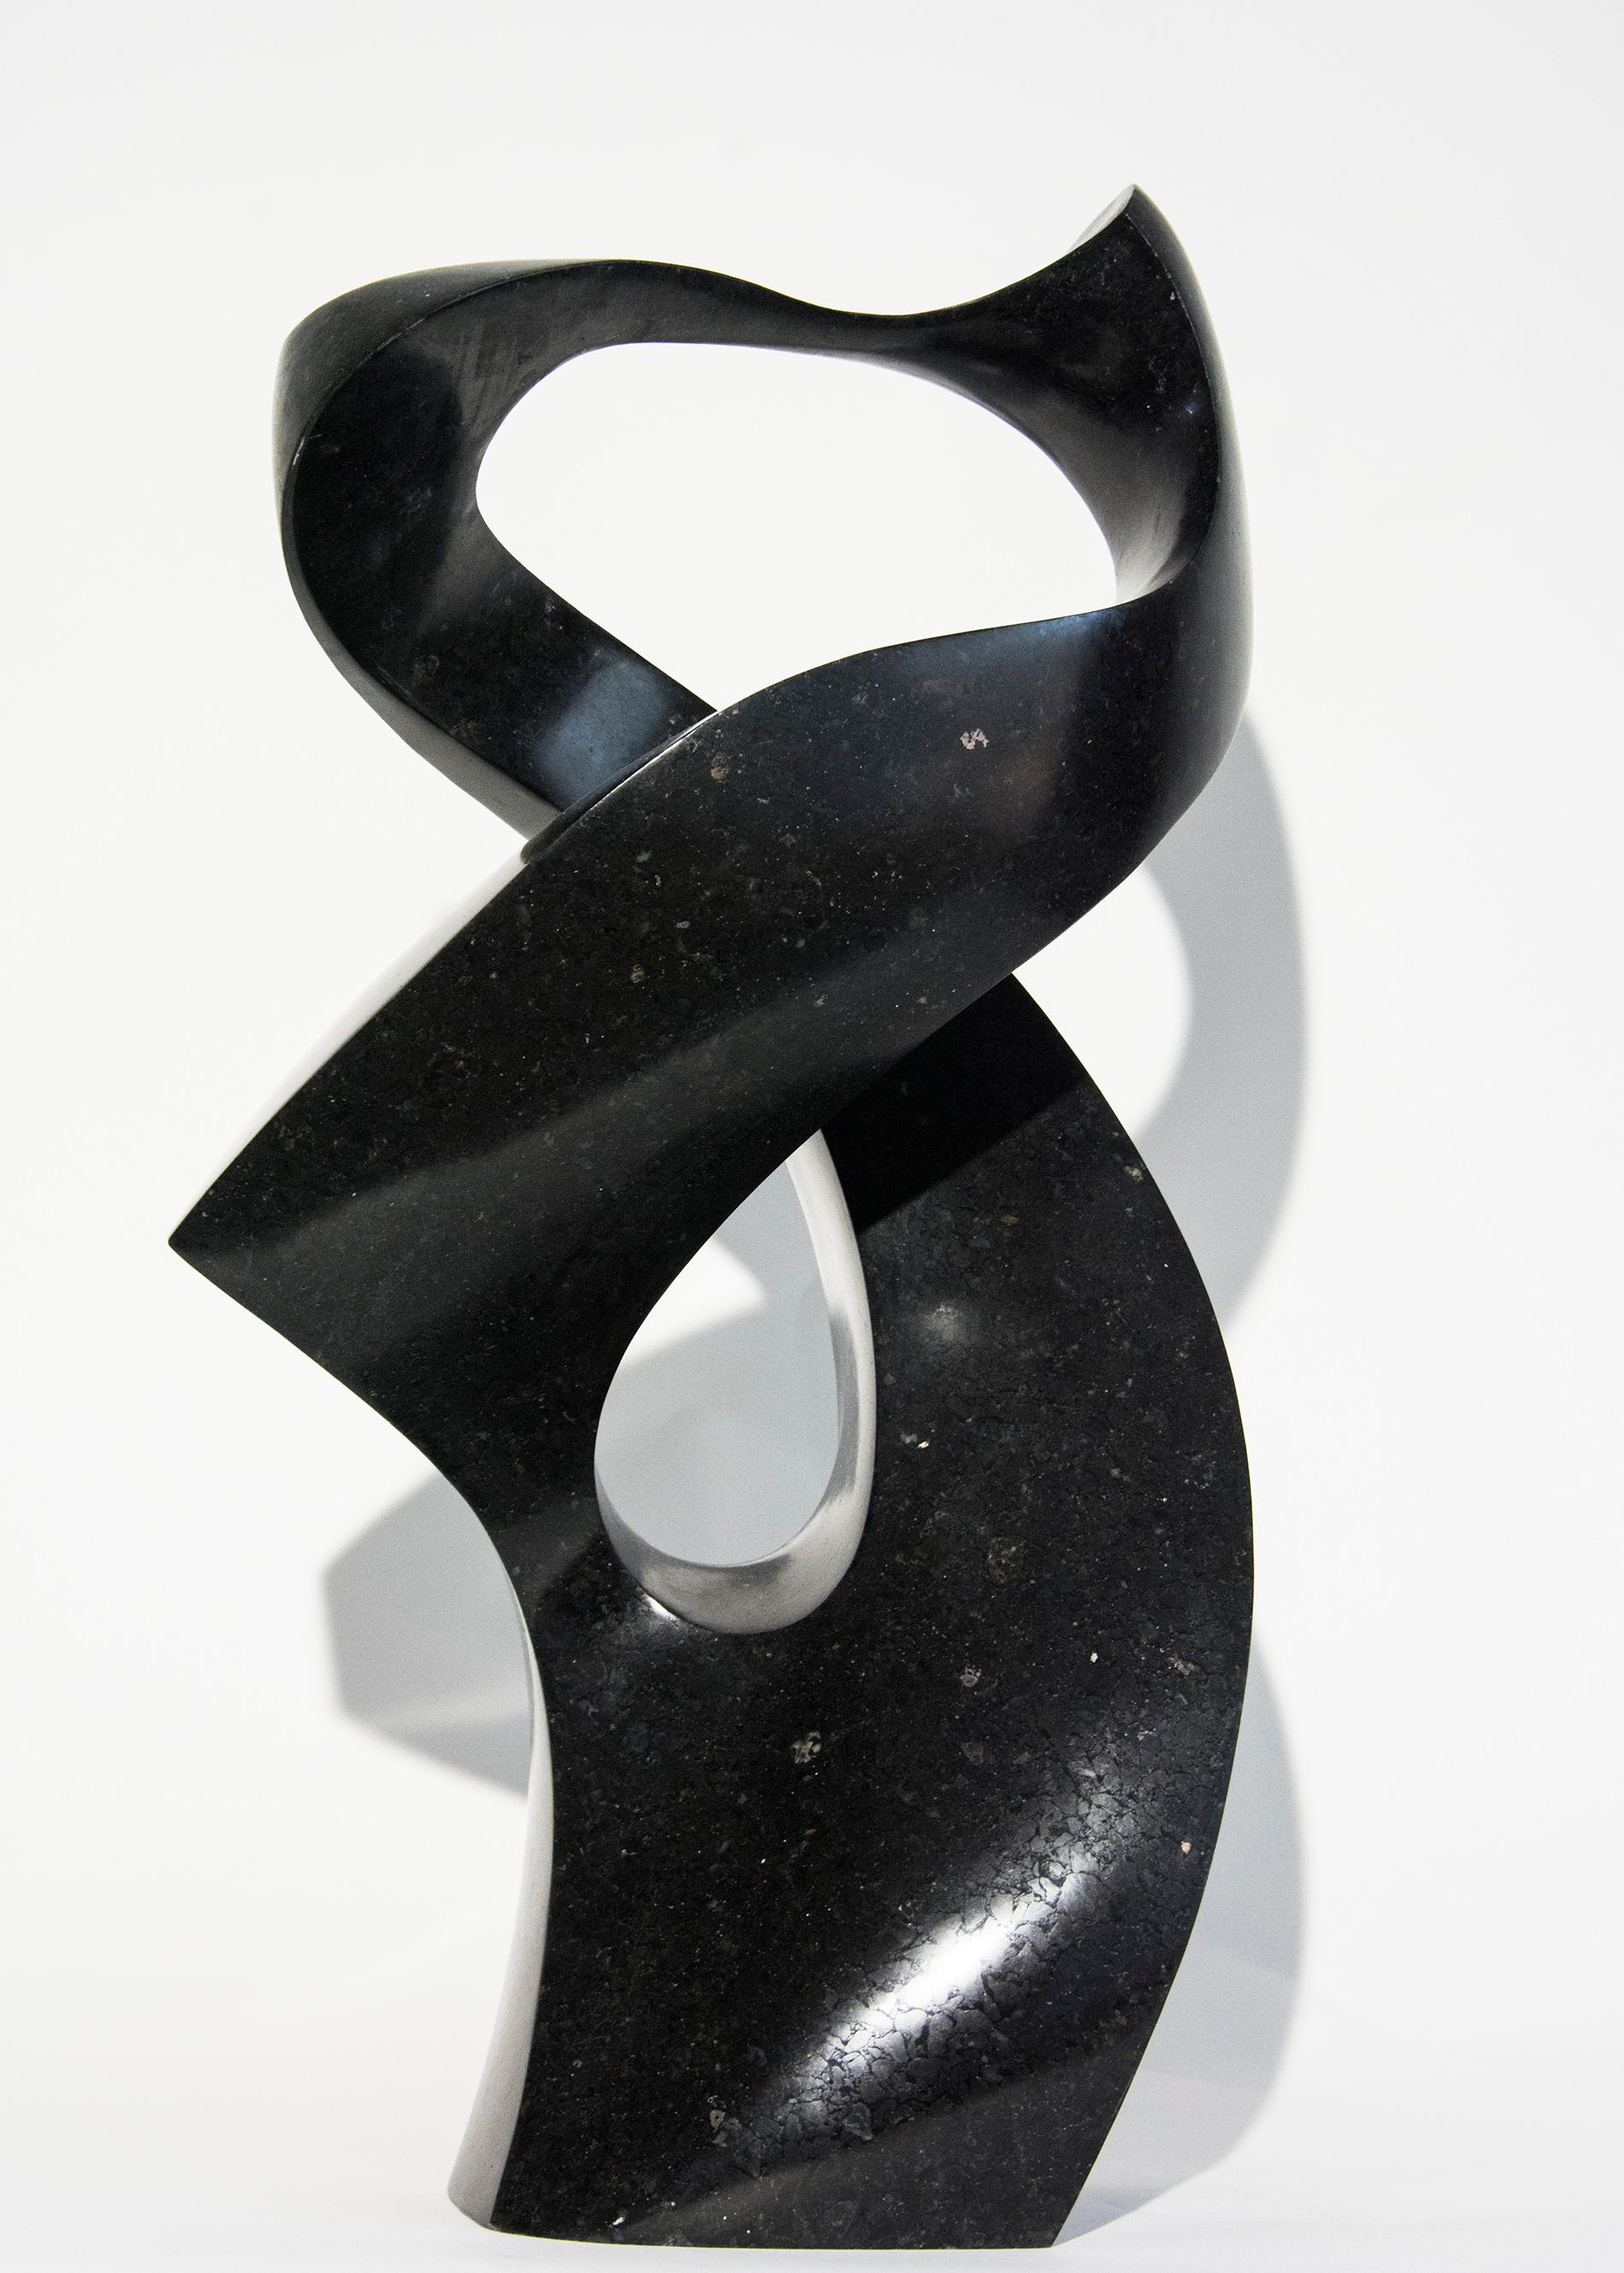 Embrace 3/50 - dark, smooth, polished, abstract, black granite sculpture - Sculpture by Jeremy Guy